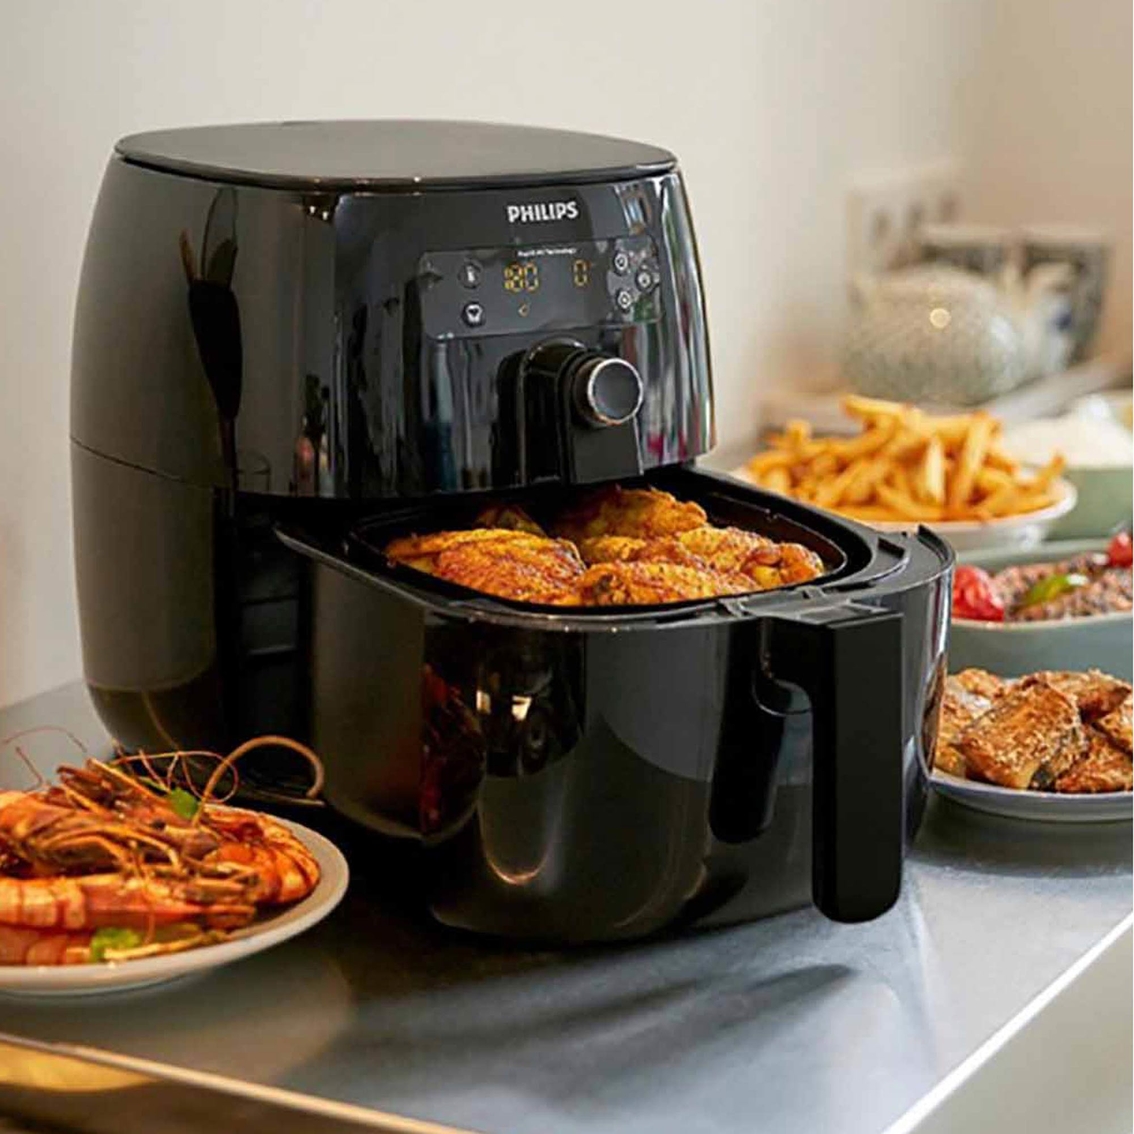 Philips Avance Collection Airfryer, Black - Image 3 of 3